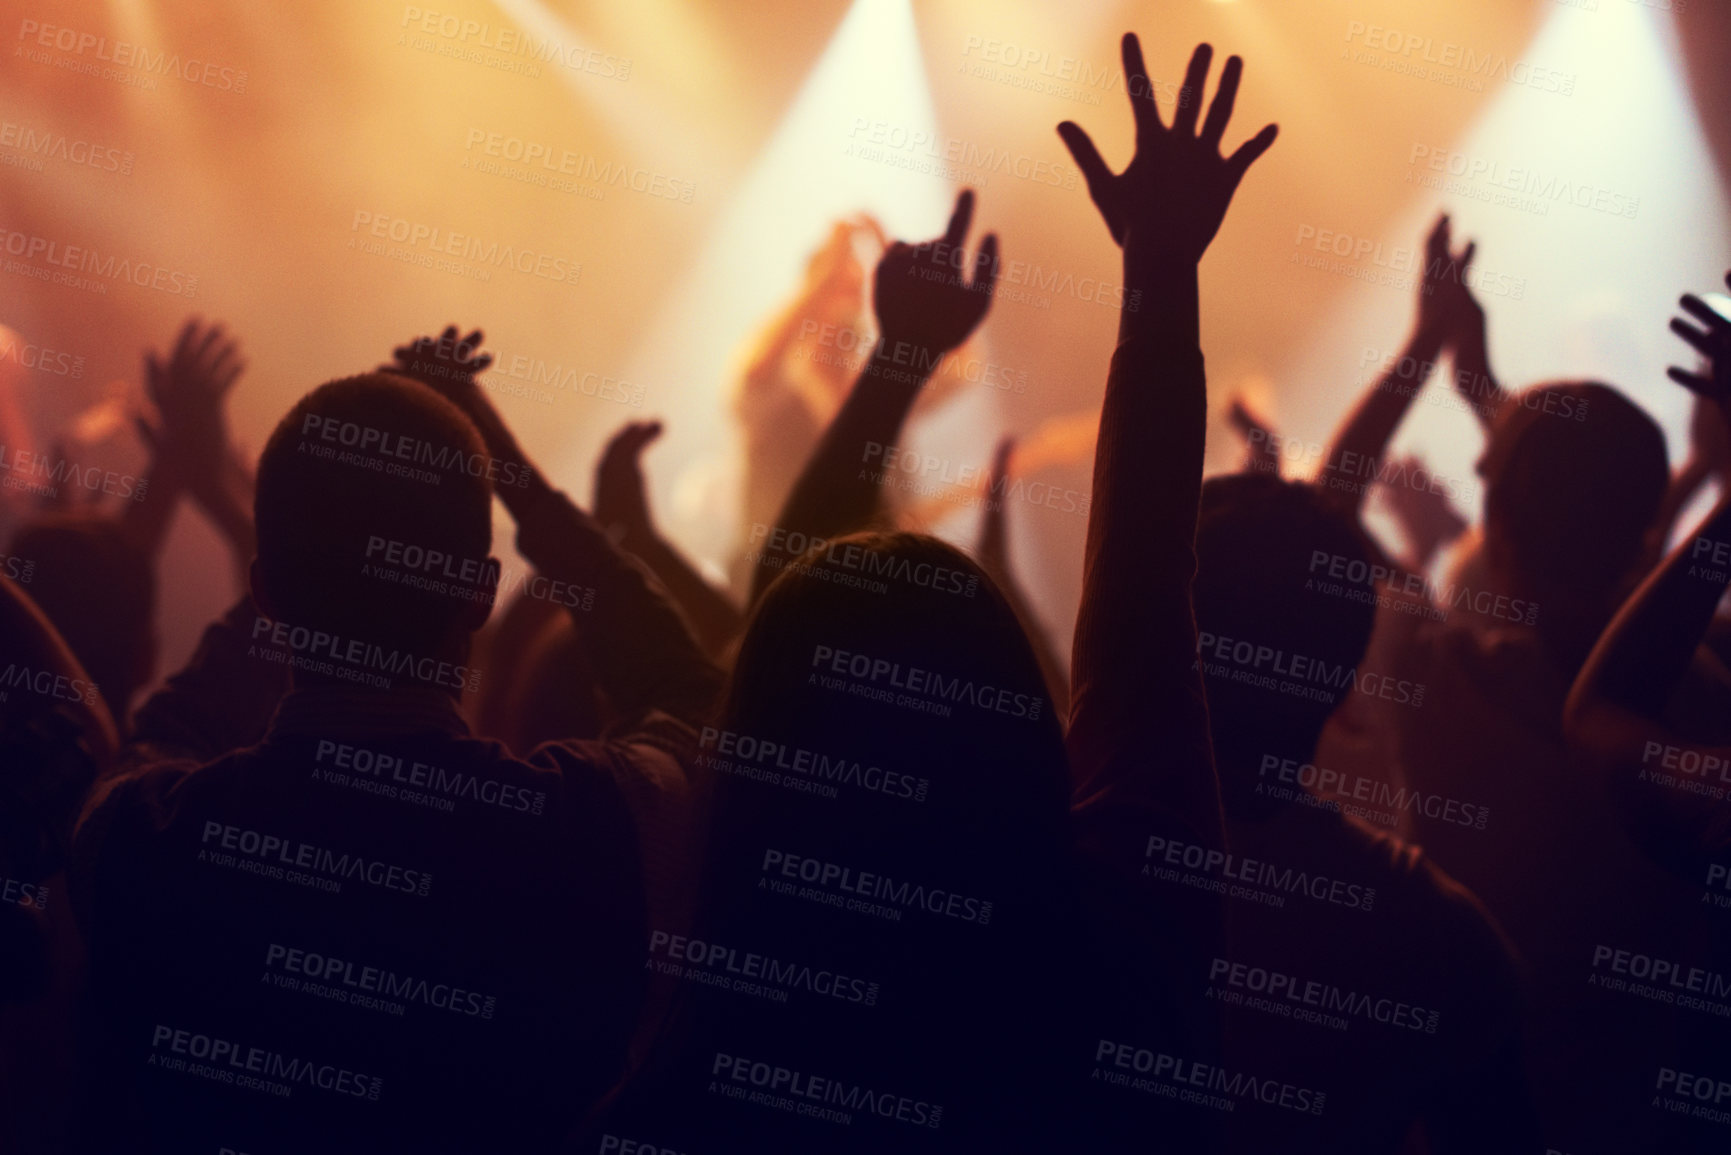 Buy stock photo Music, lights and hands of crowd at concert for party, disco and live band performance. Dance, nightclub and silhouette of audience listening to artist on stage at festival for energy, rave and event